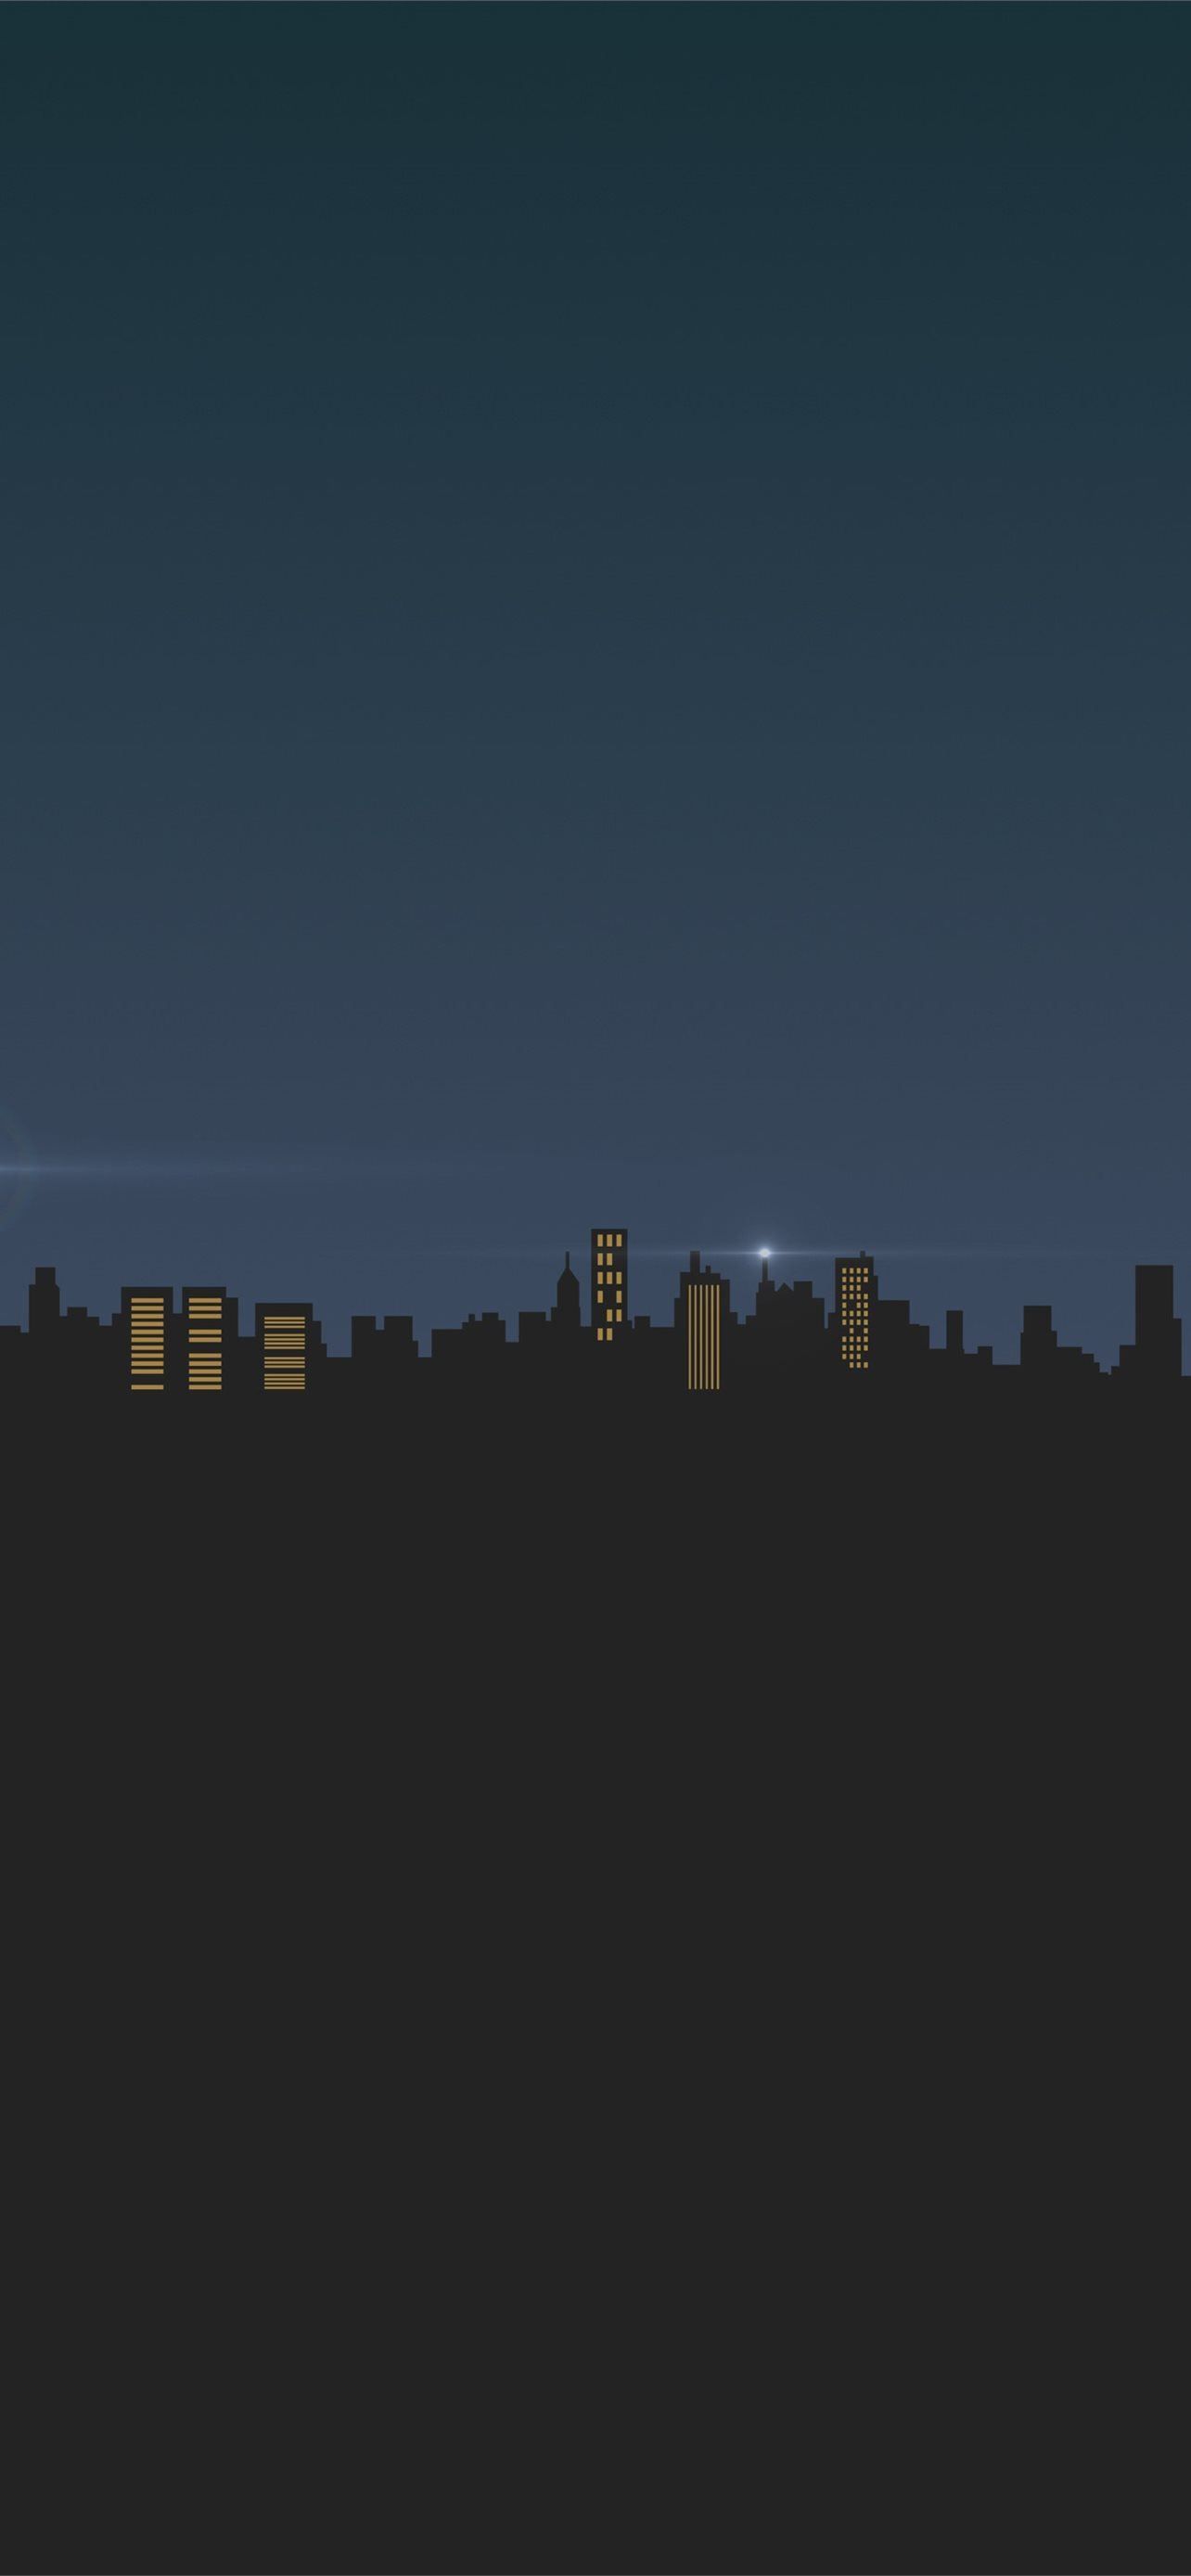 Minimalist cityscape at night wallpaper for your iPhone from Vibe app - Minimalist